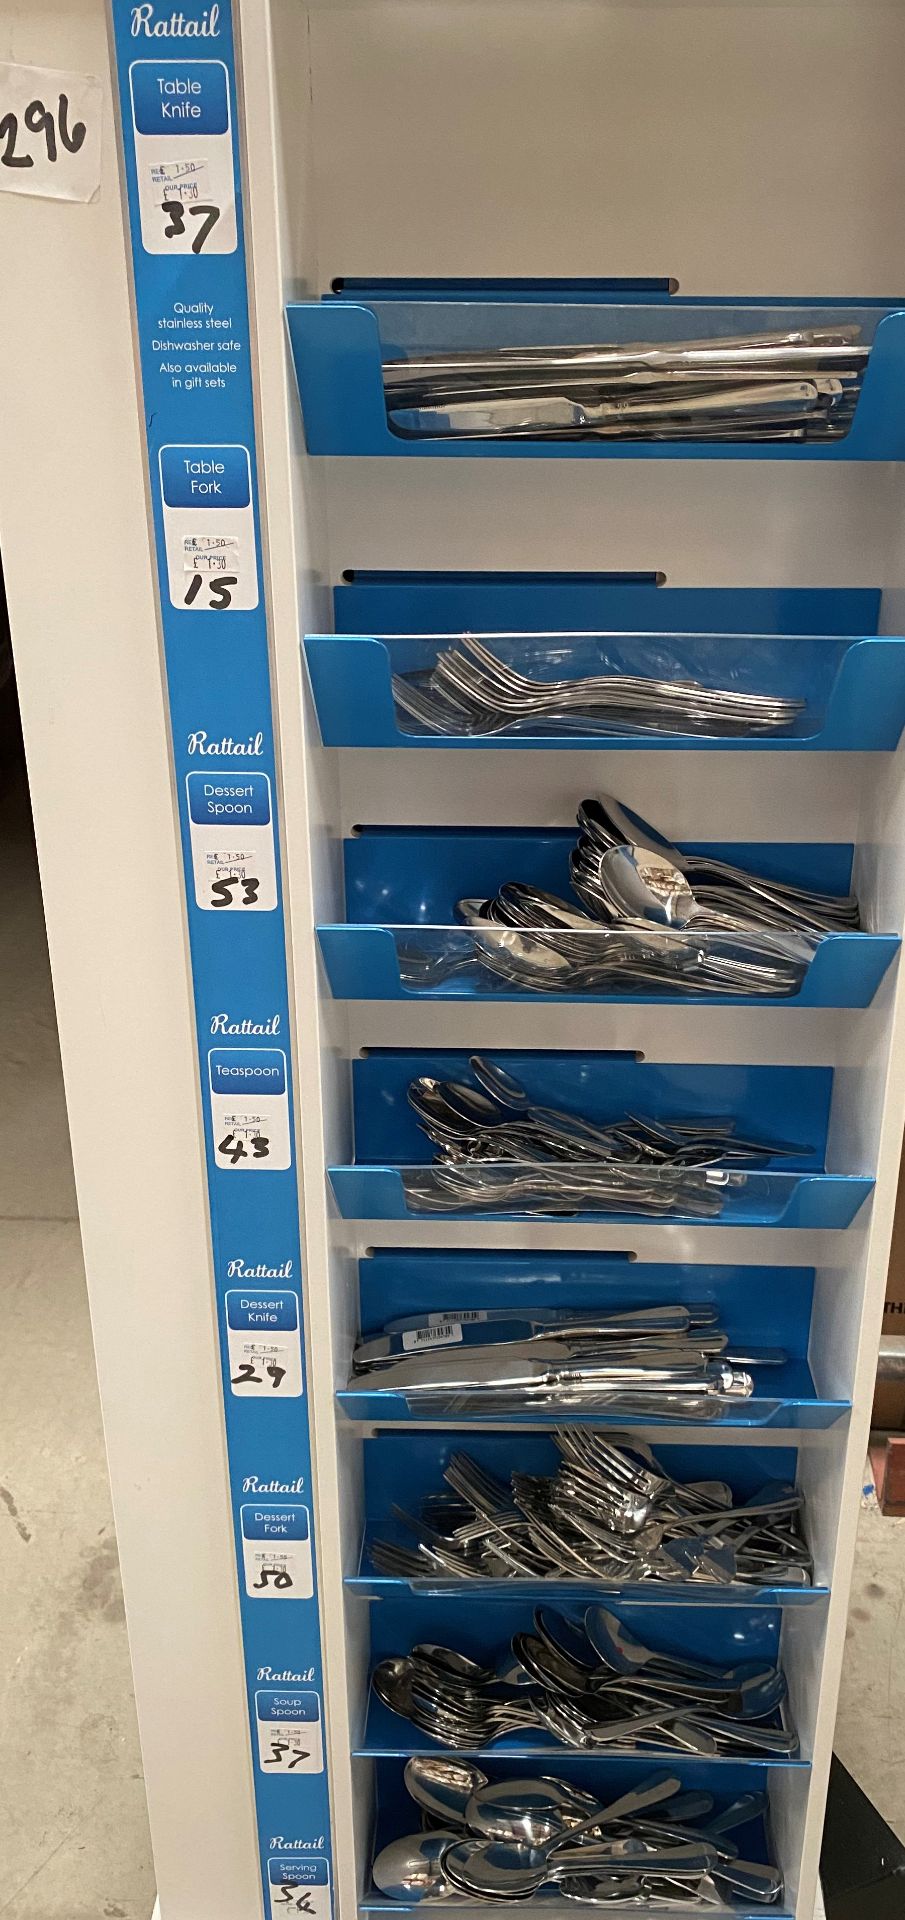 Contents to one side of an 8 shelf display - 296 pieces of Amefa Rattail cutlery - including knives,